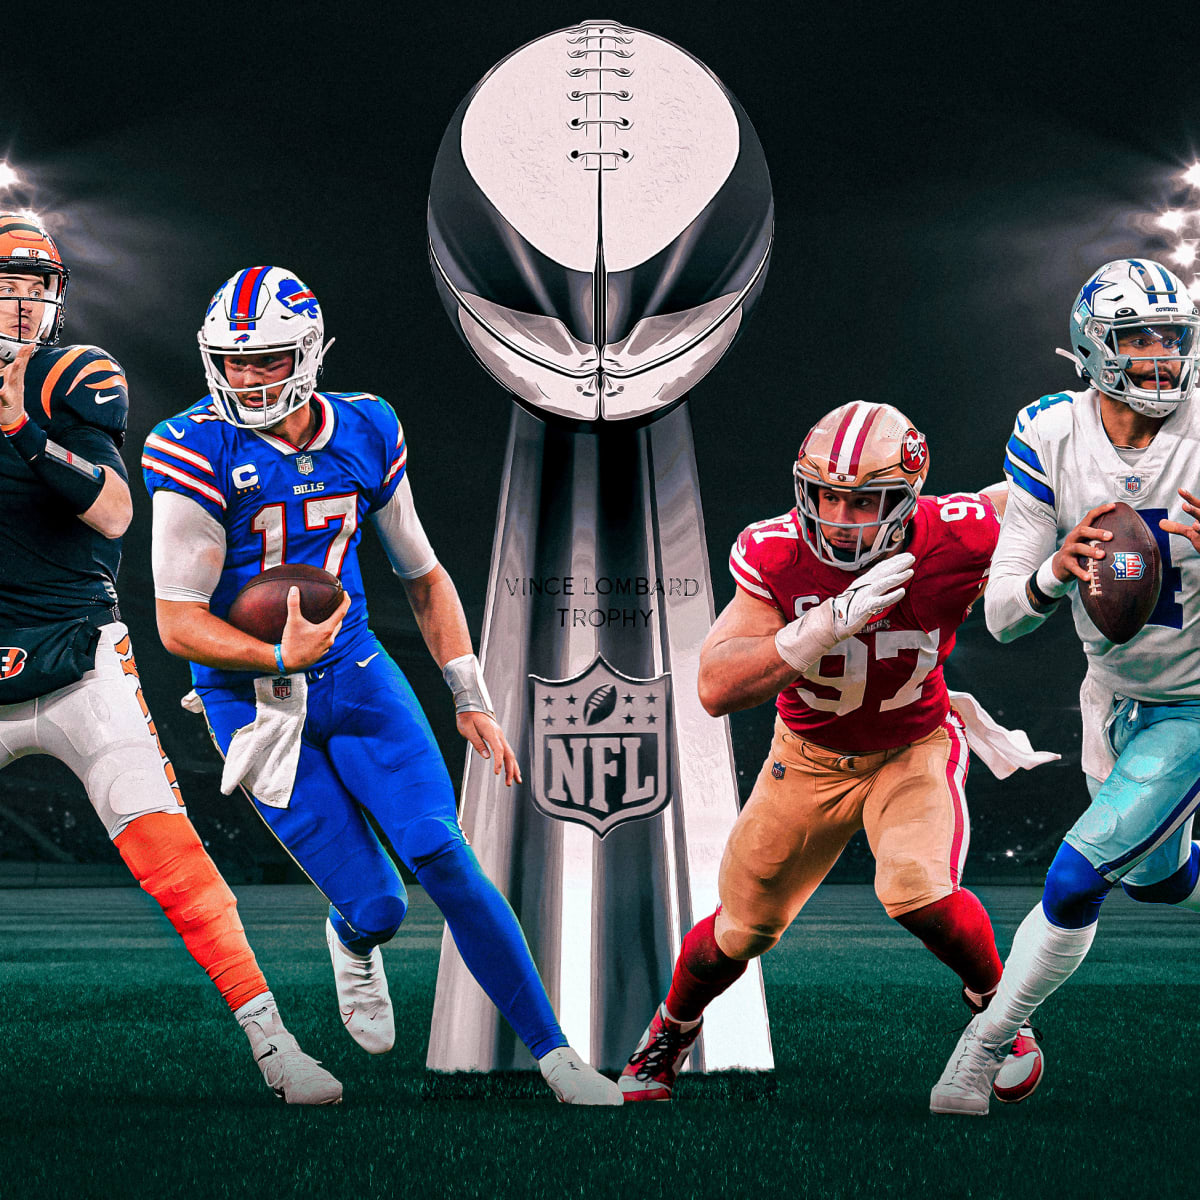 who is predicted to win the super bowl tomorrow